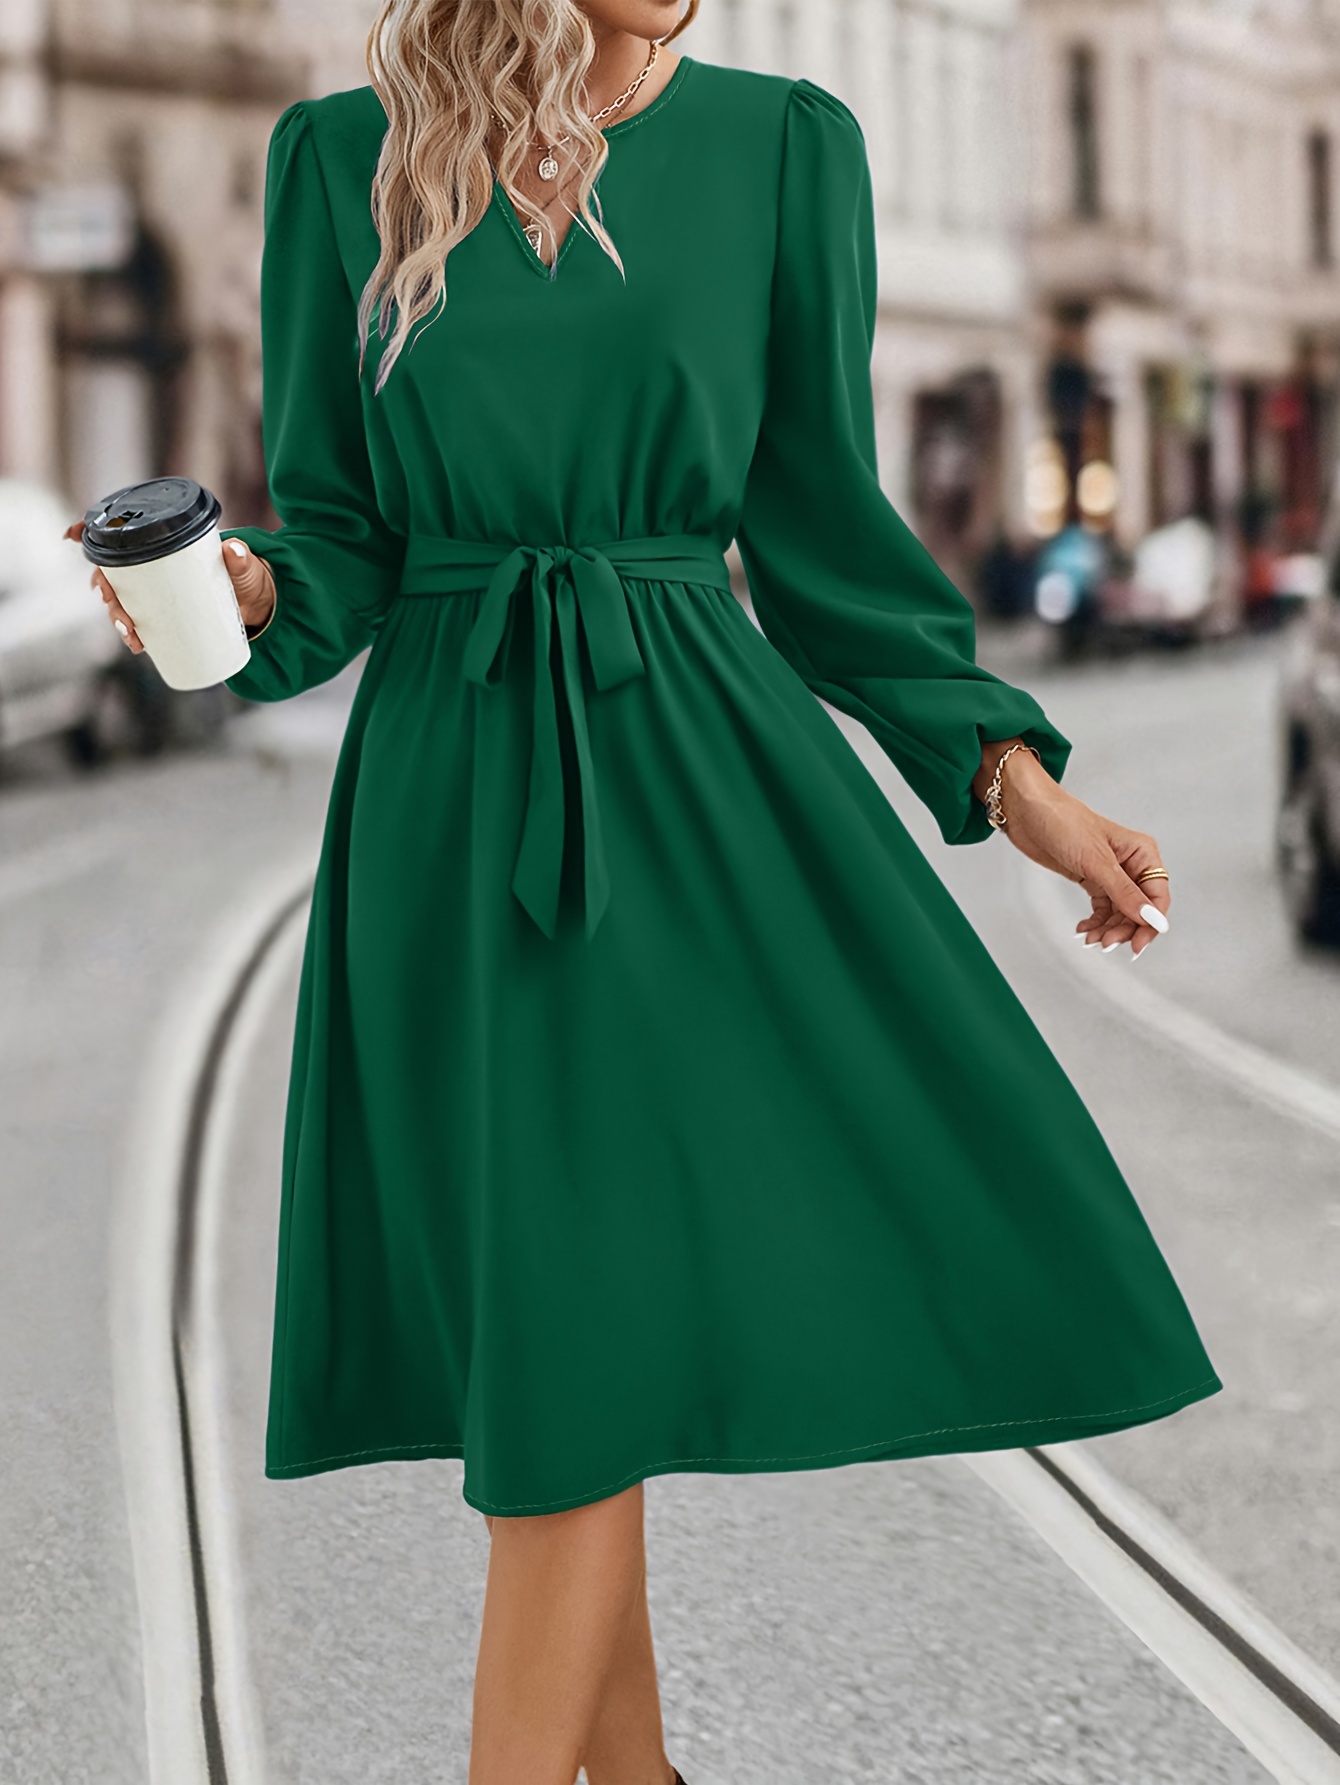 BEEYASO Clearance Summer Dresses For Women Solid Crew Neck A-Line  Mid-Length Leisure Long Sleeve Dress Green S